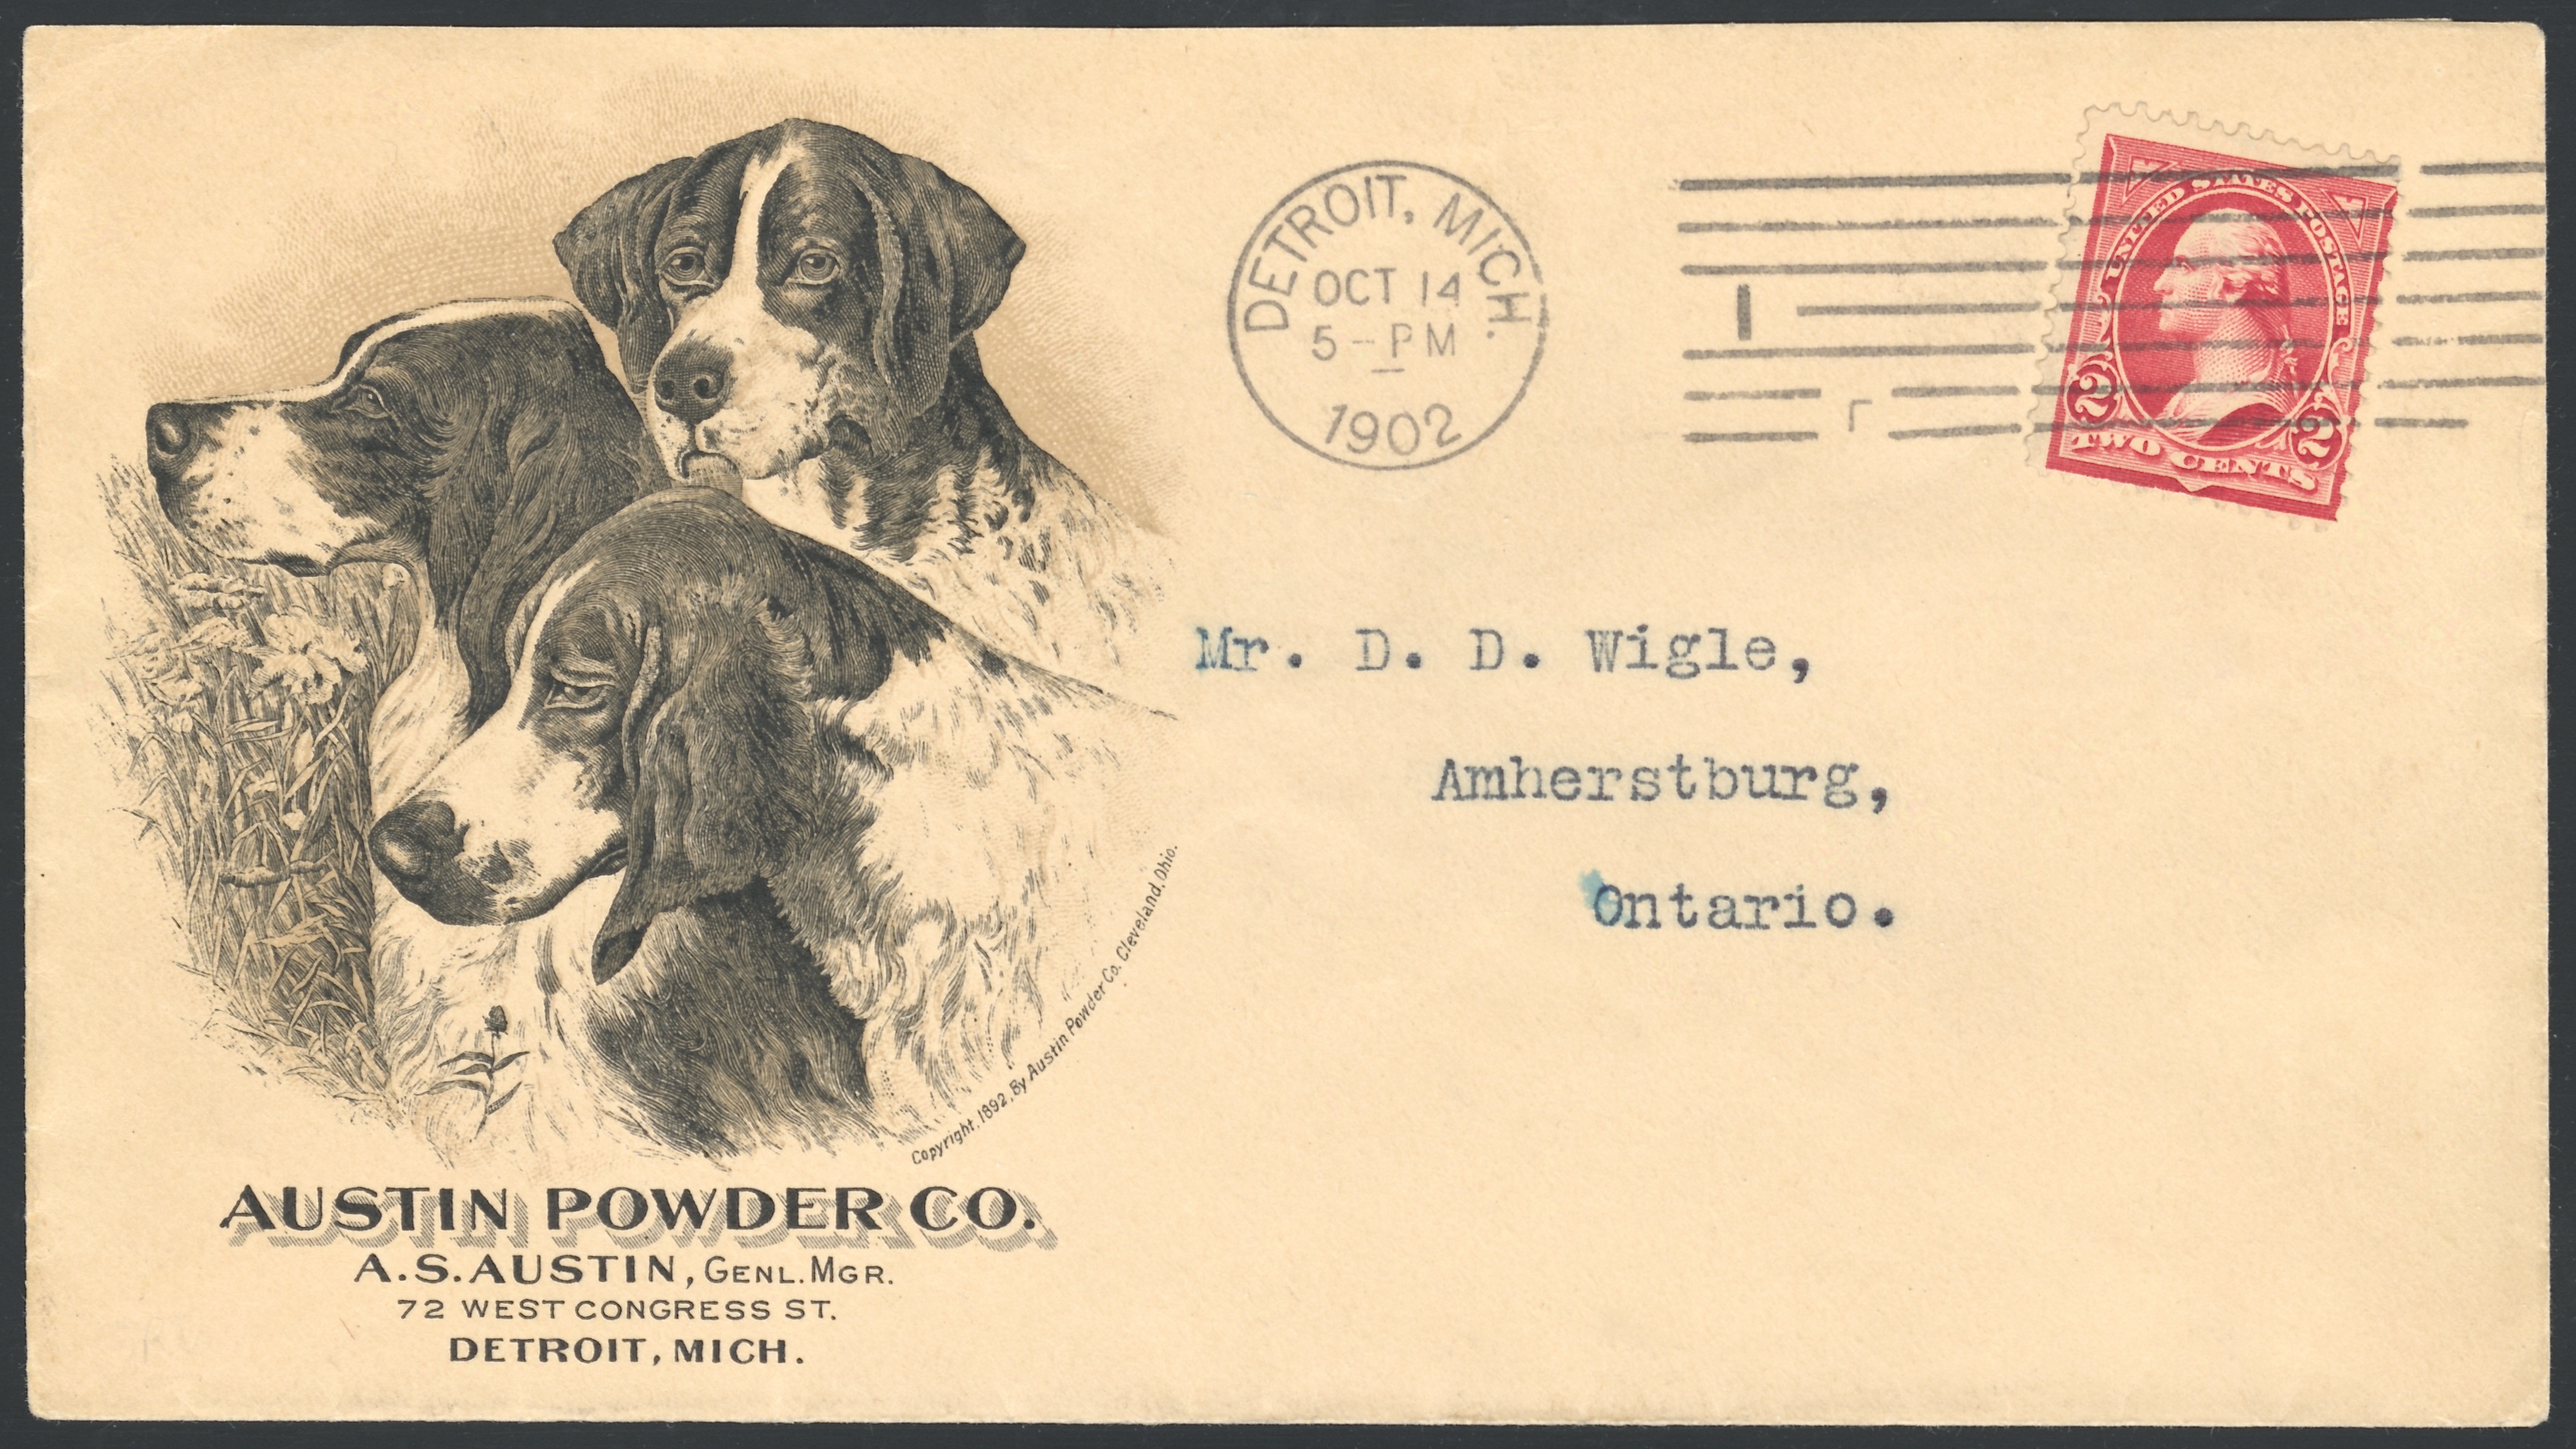 Austin Powder Advertising Cover, used in 1902